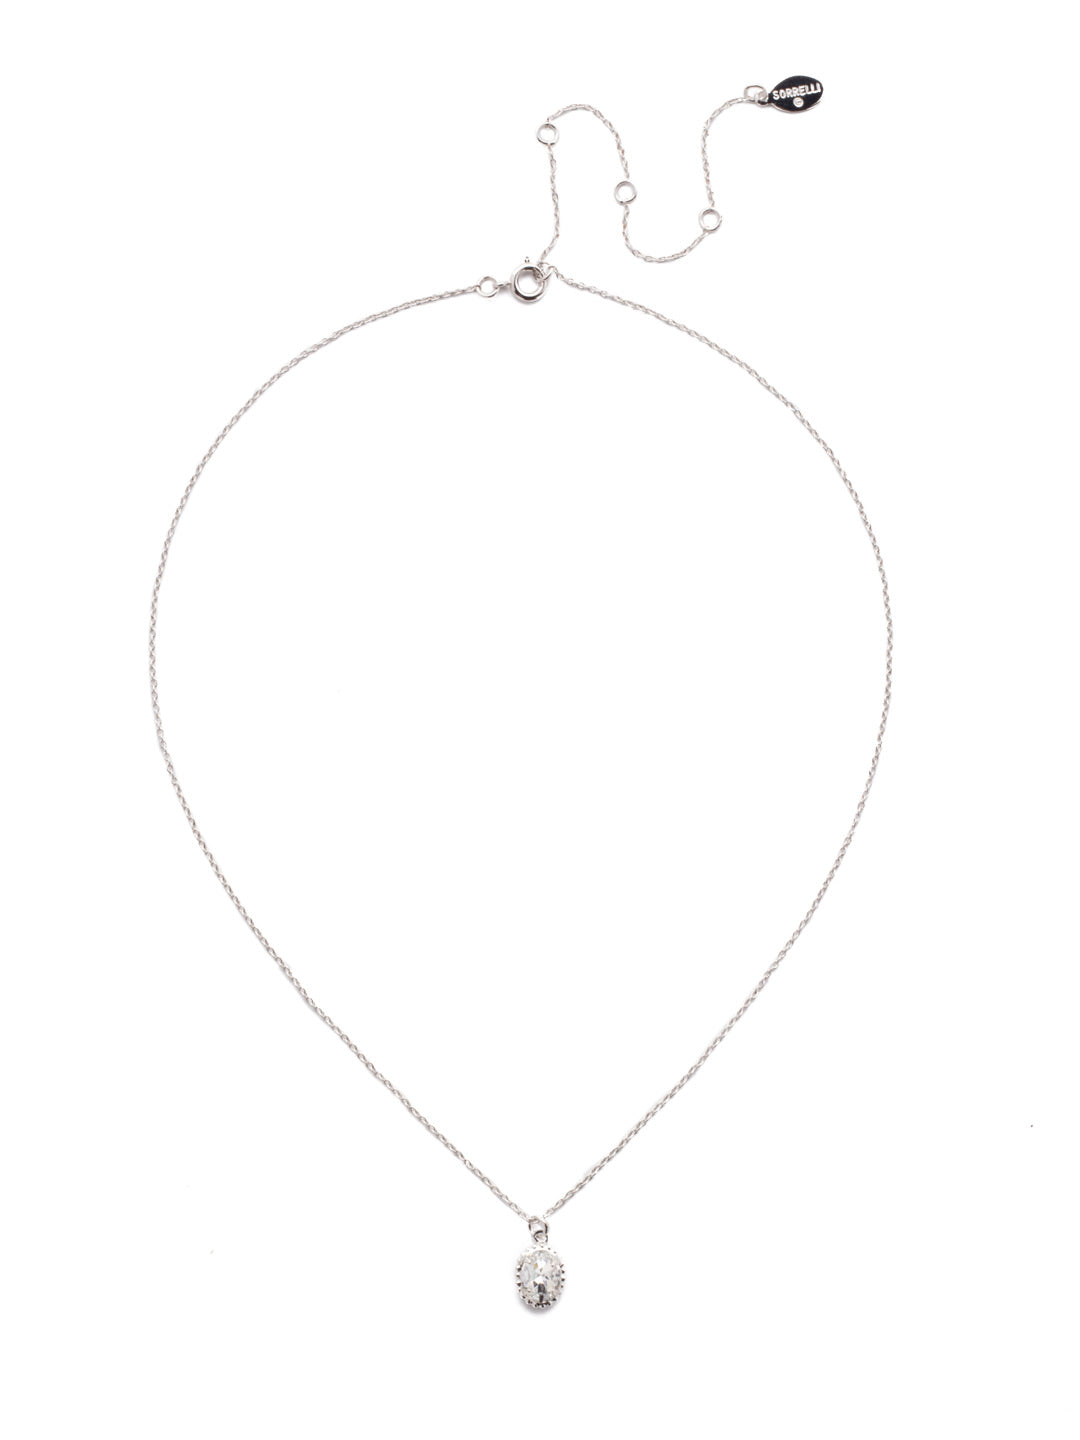 Maisie Pendant Necklace - NEF49RHCRY - <p>This is the perfect day-to-night sparkling tiny pendant necklace that has an adjustable chain to fit your neckline. From Sorrelli's Crystal collection in our Palladium Silver-tone finish.</p>